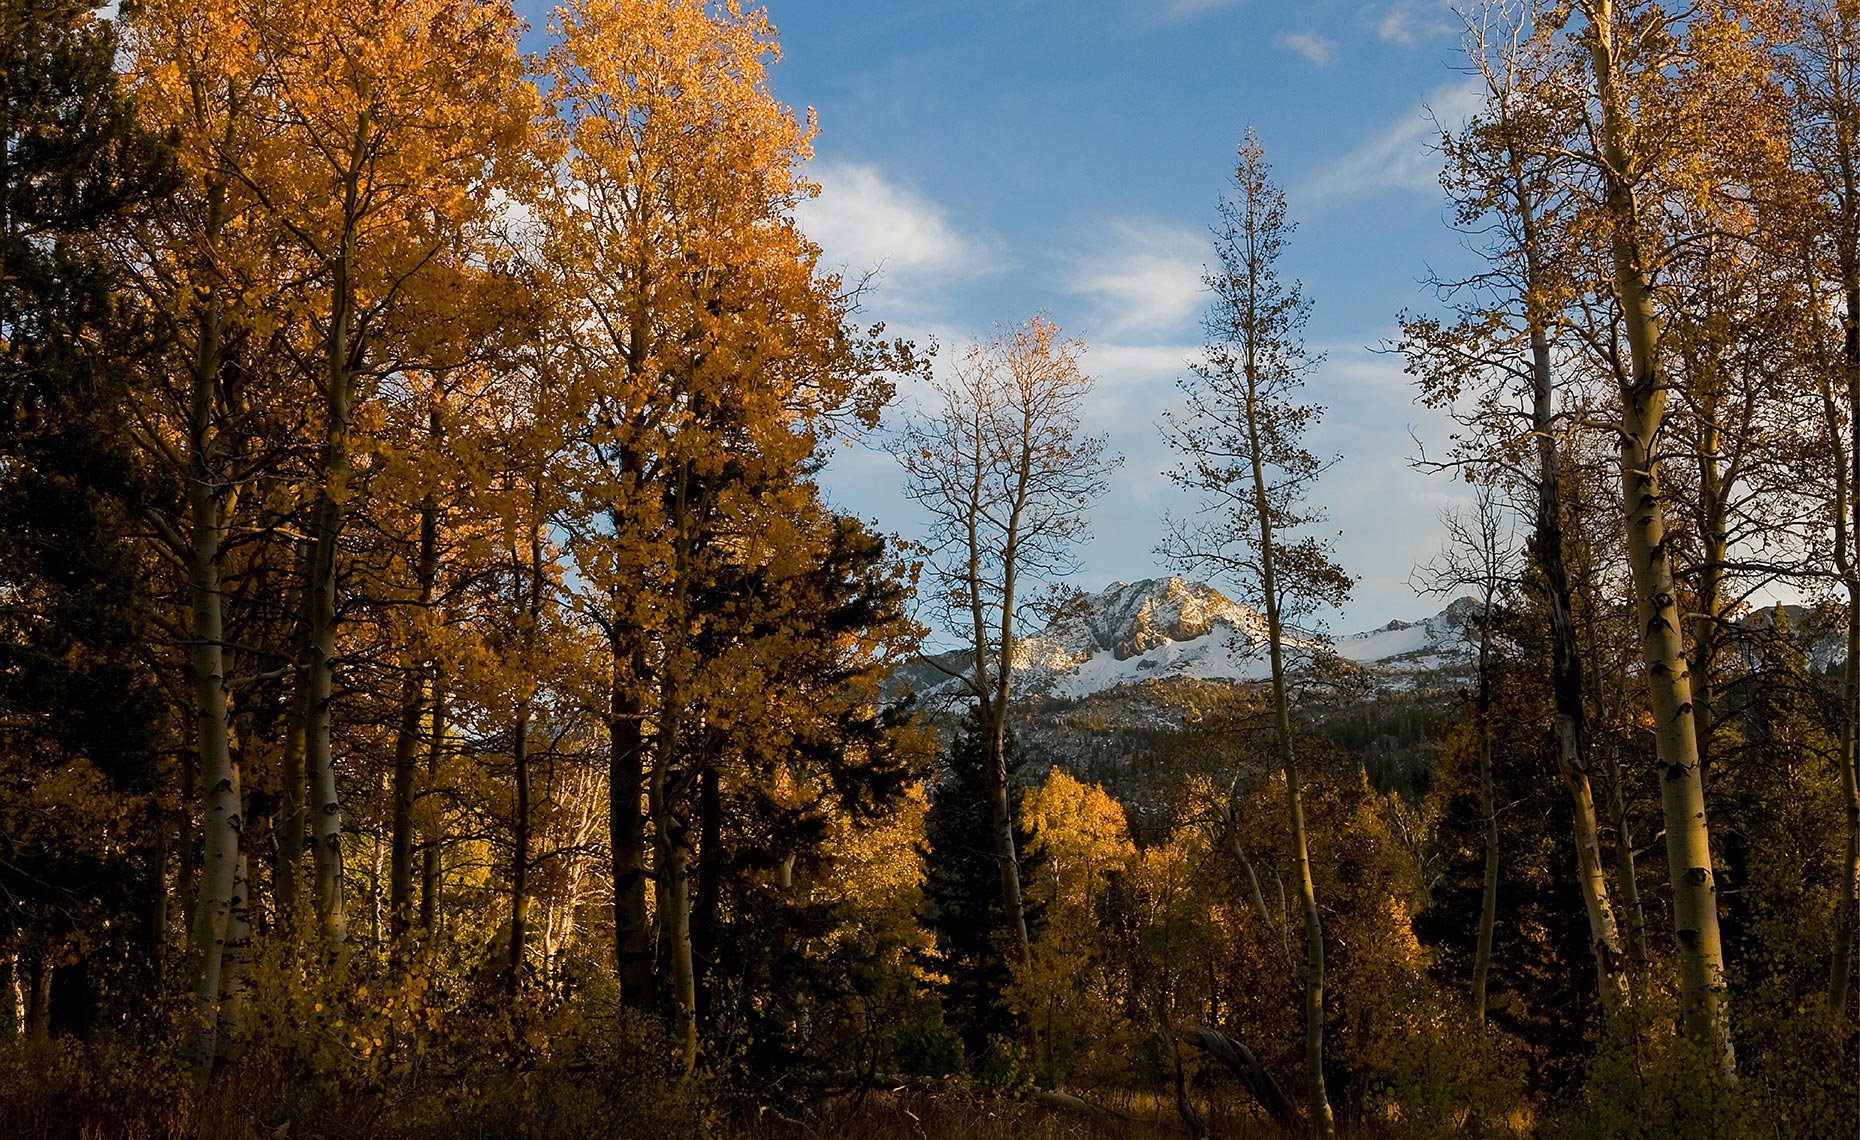 08_South_Lake_Tahoe_Roundtop_Fall_Colors_Backcountry_California_Environment_Landscape_Chris_Wellhausen_Photography.JPG